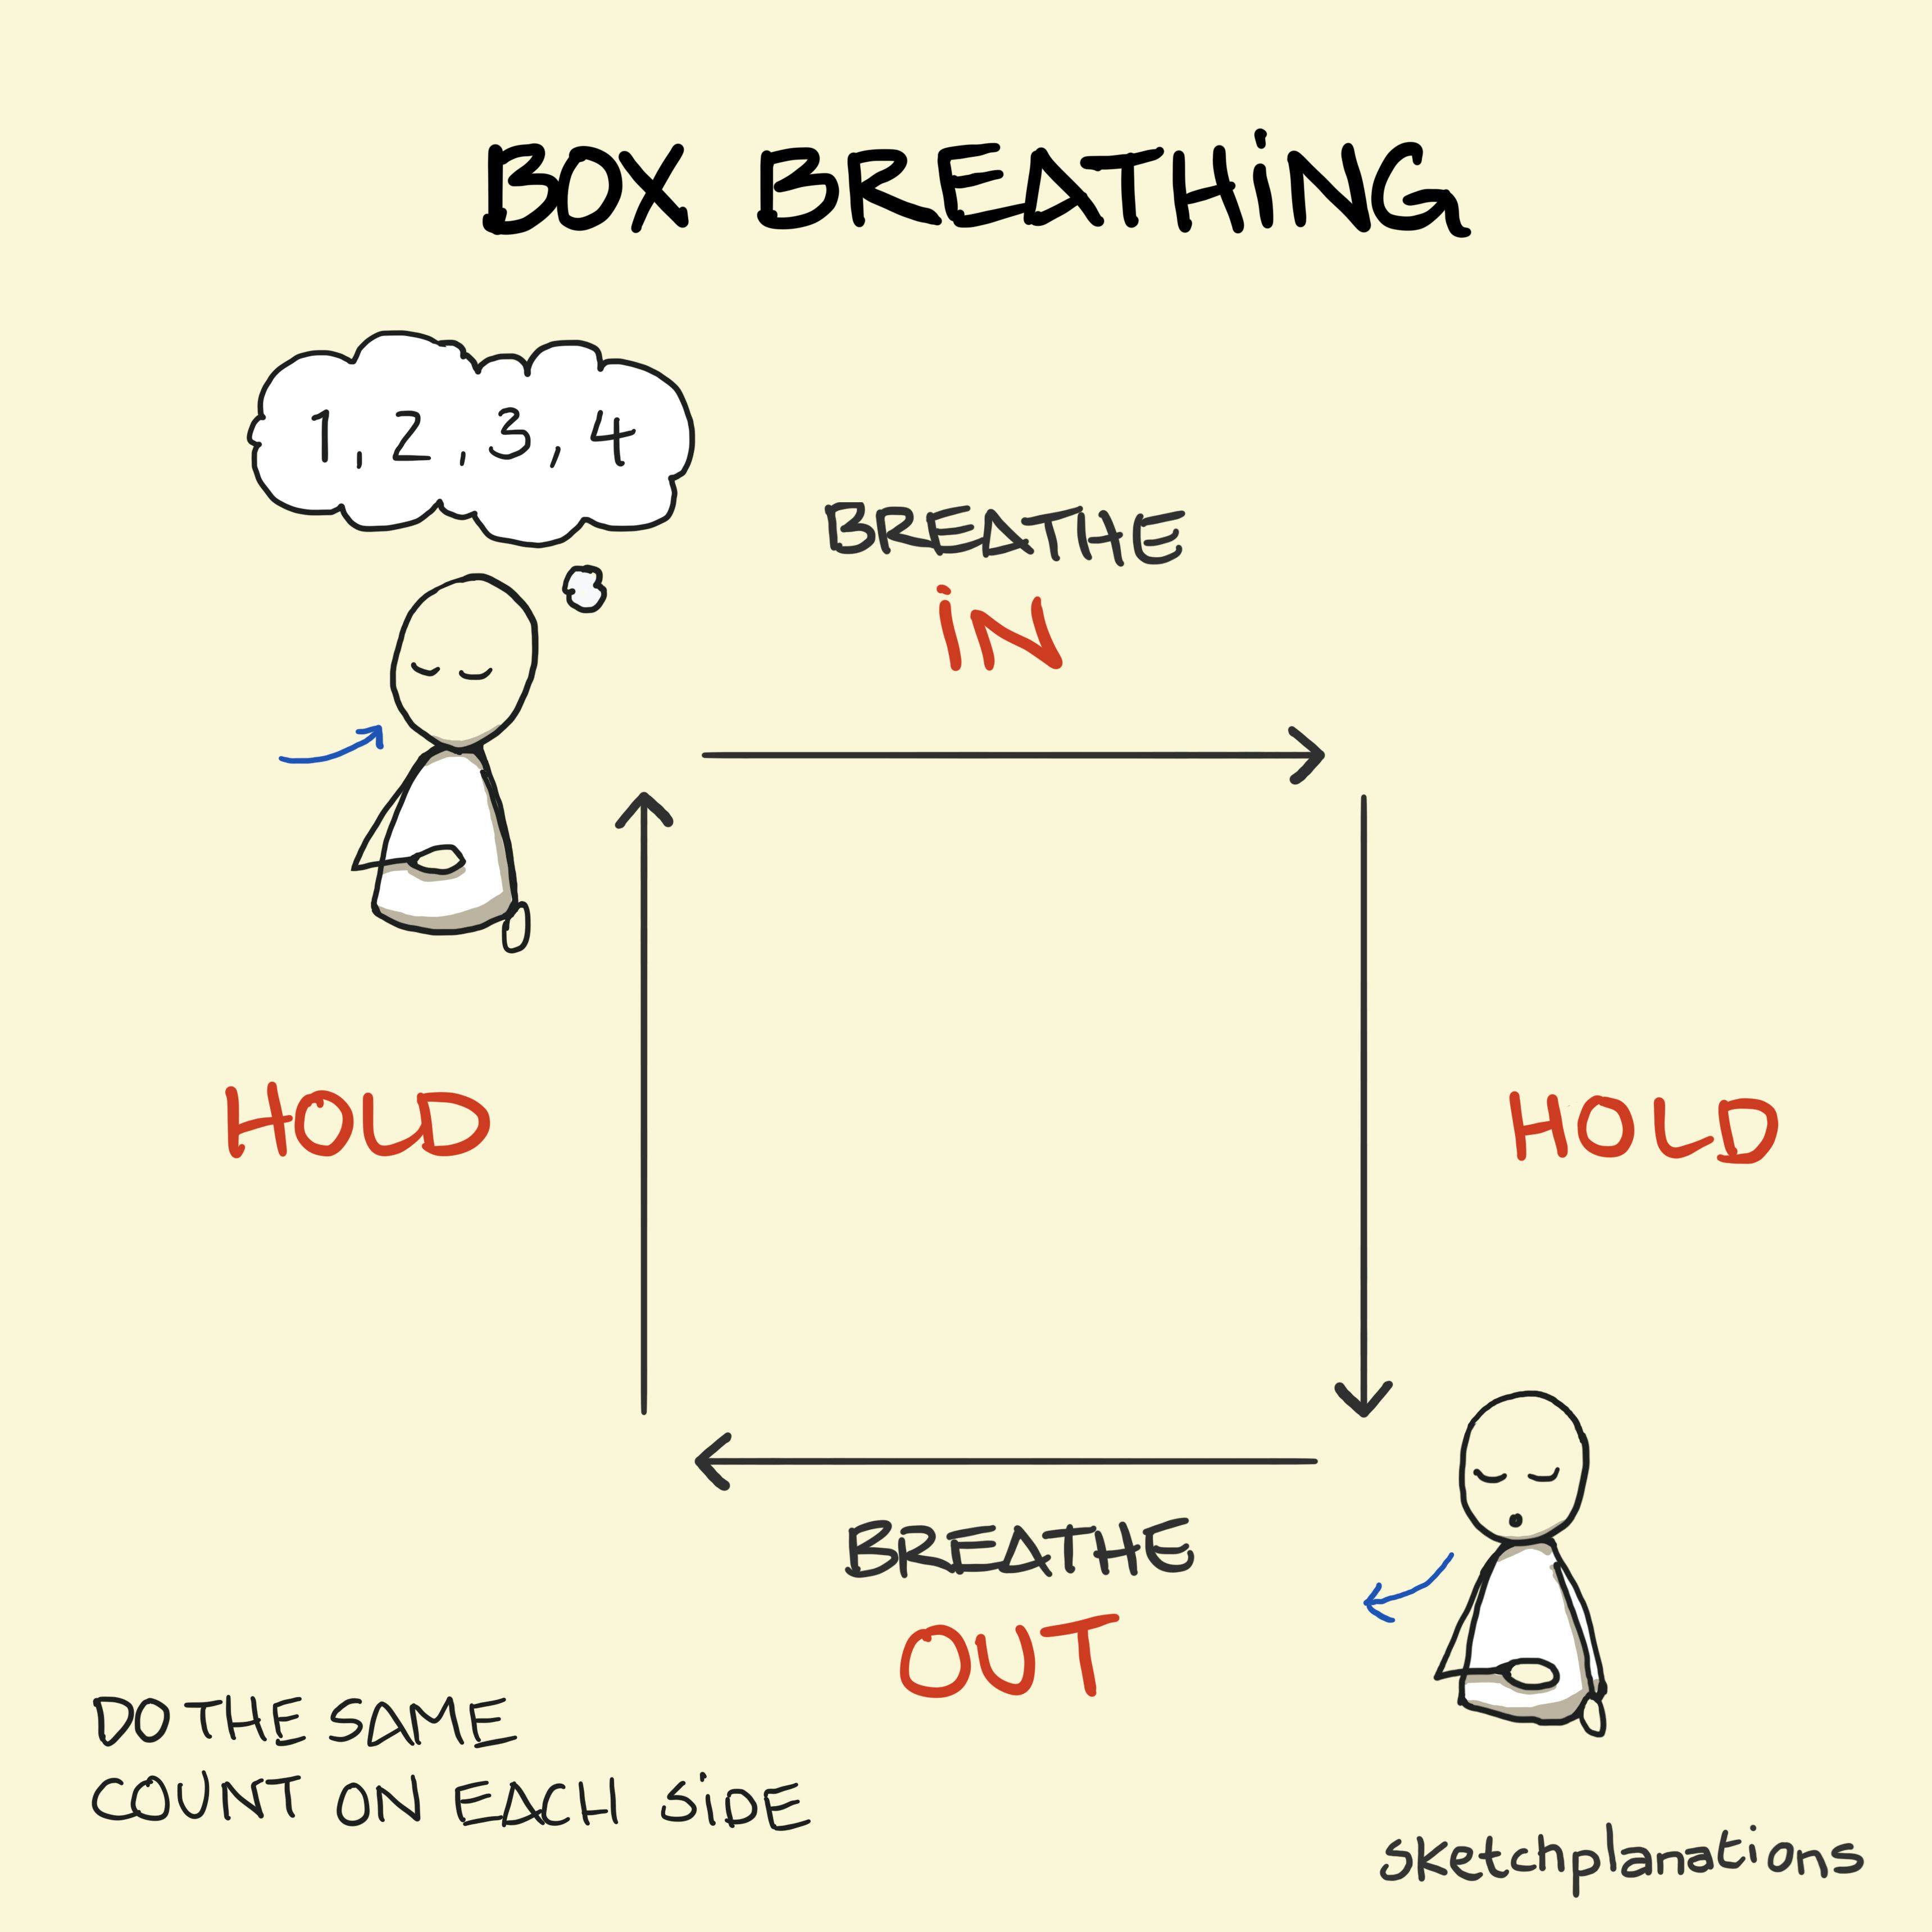 Box breathing illustration: a person demonstrates breathing in, holding breath, breathing out, holding breath, counting 4 each side around the sides of a box. Also called square breathing: breathe in, hold, breathe out, hold